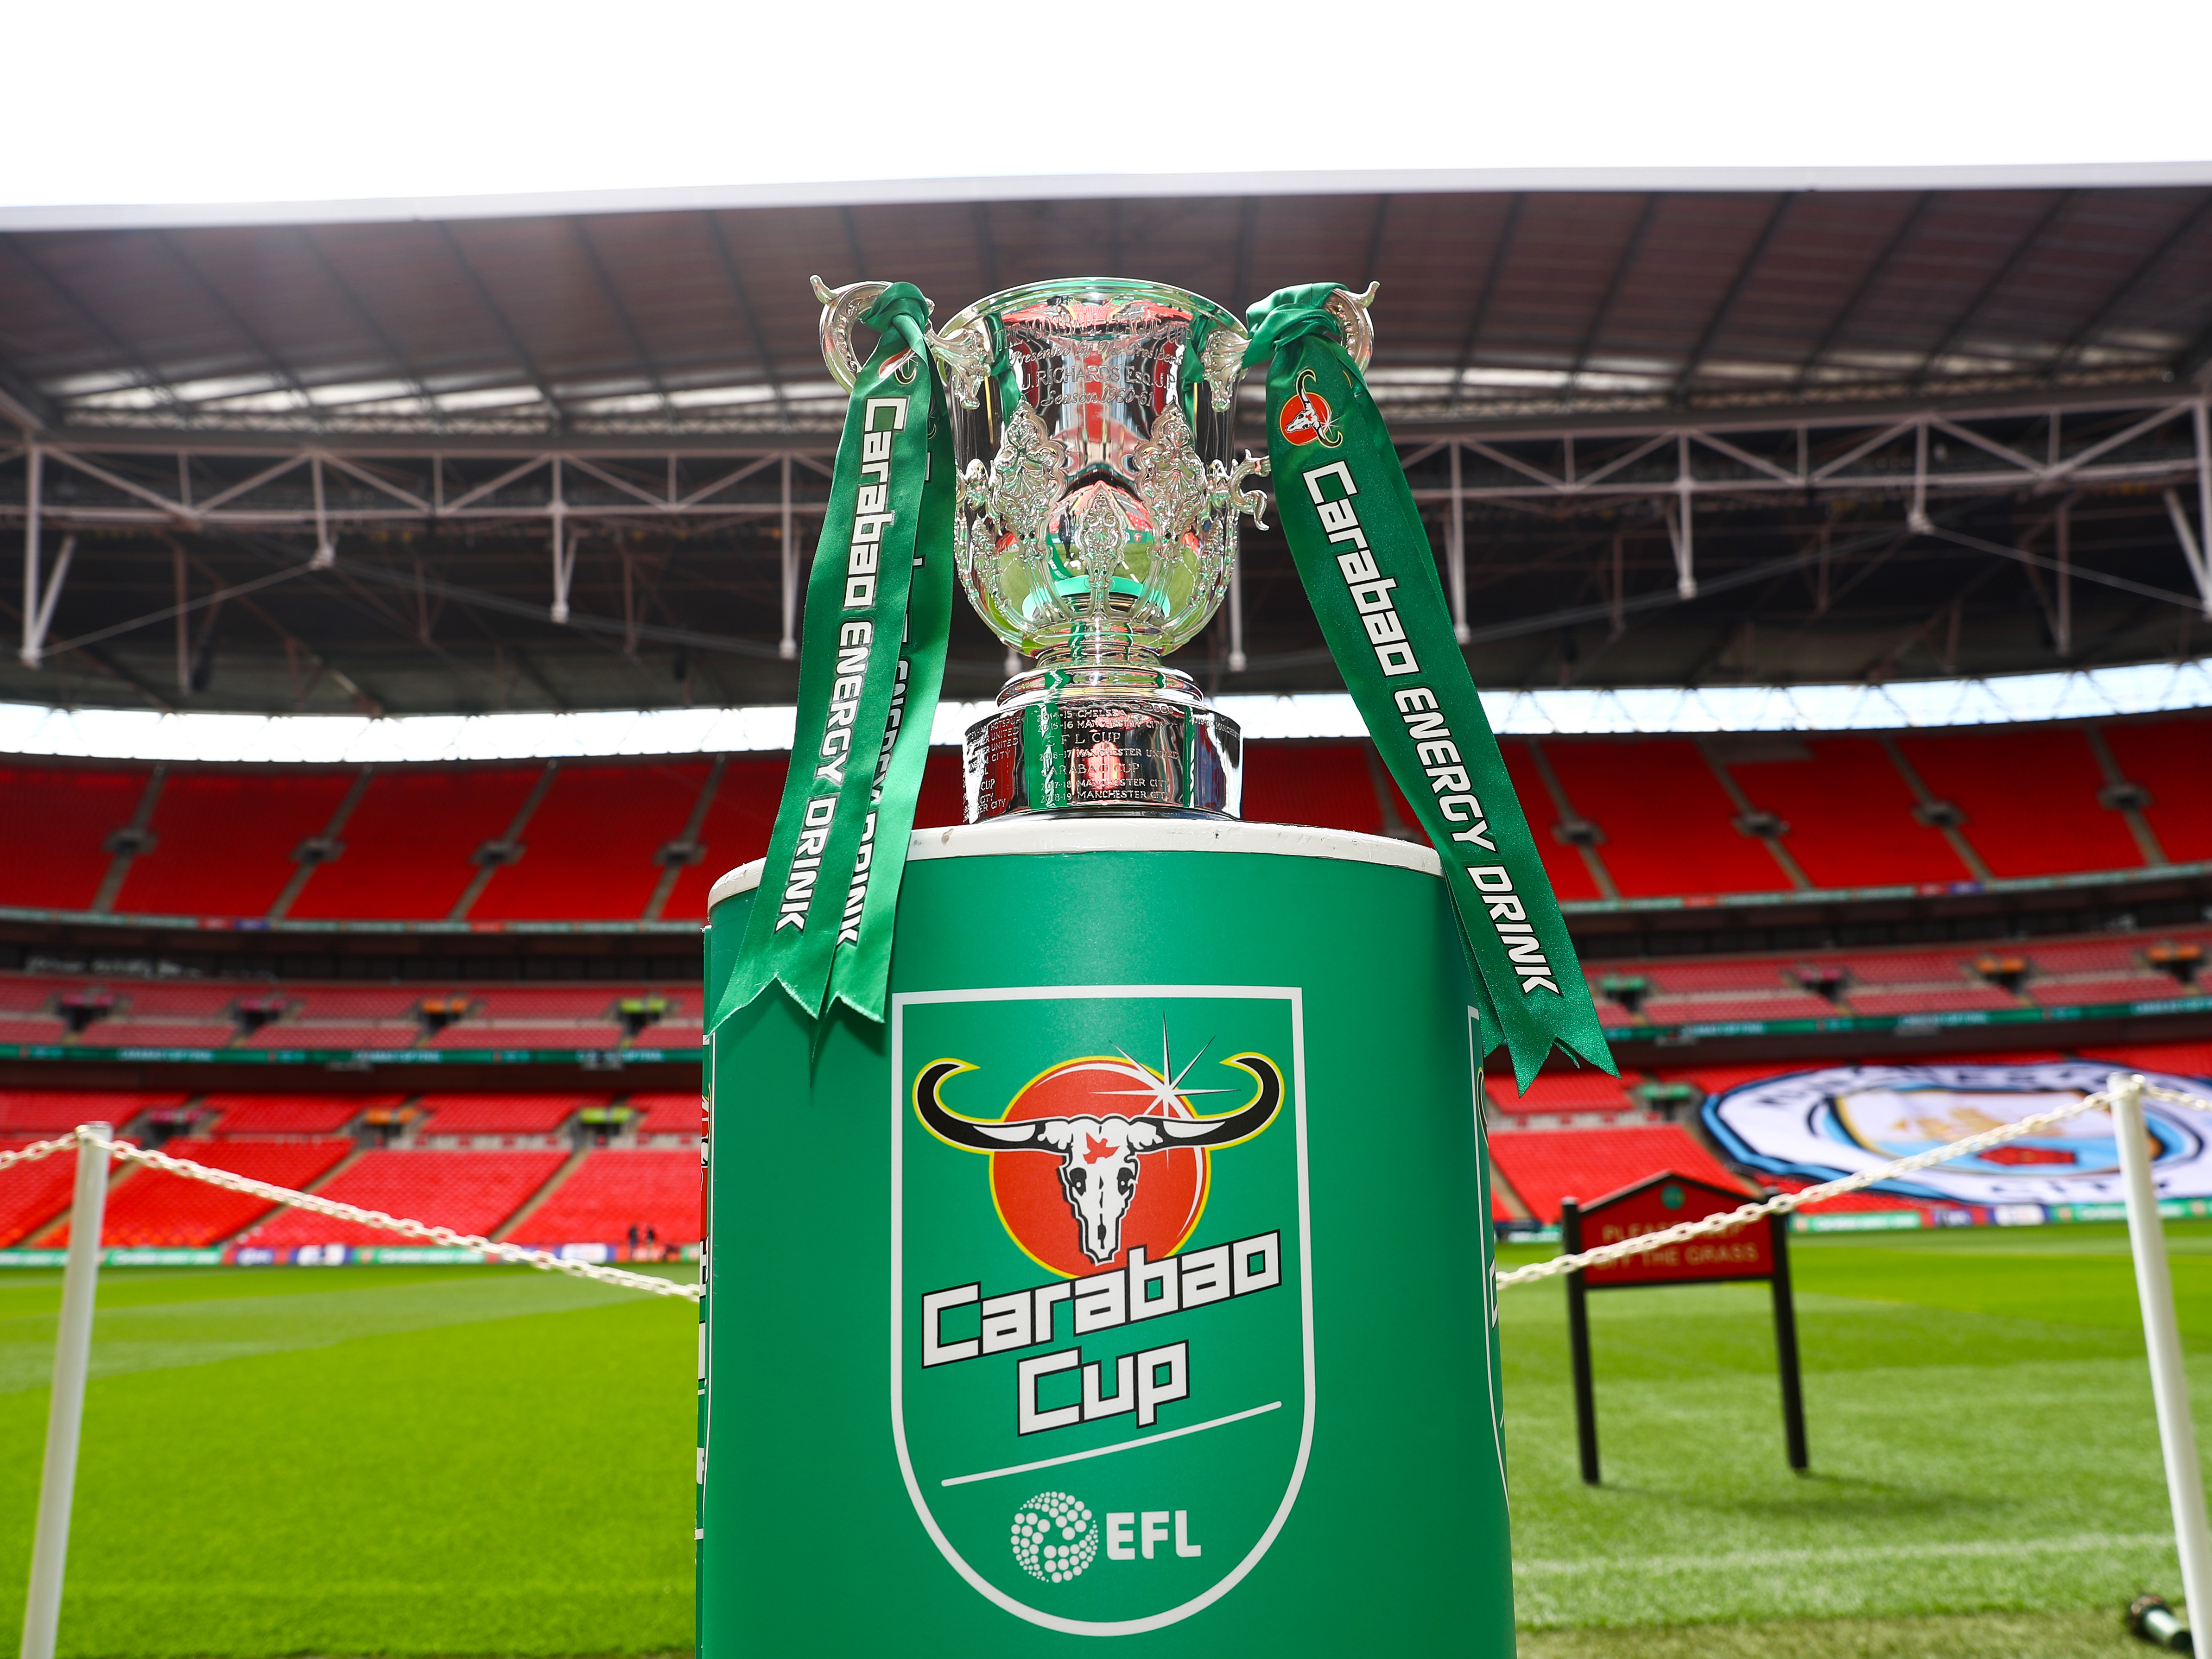 An image of the Carabao Cup trophy